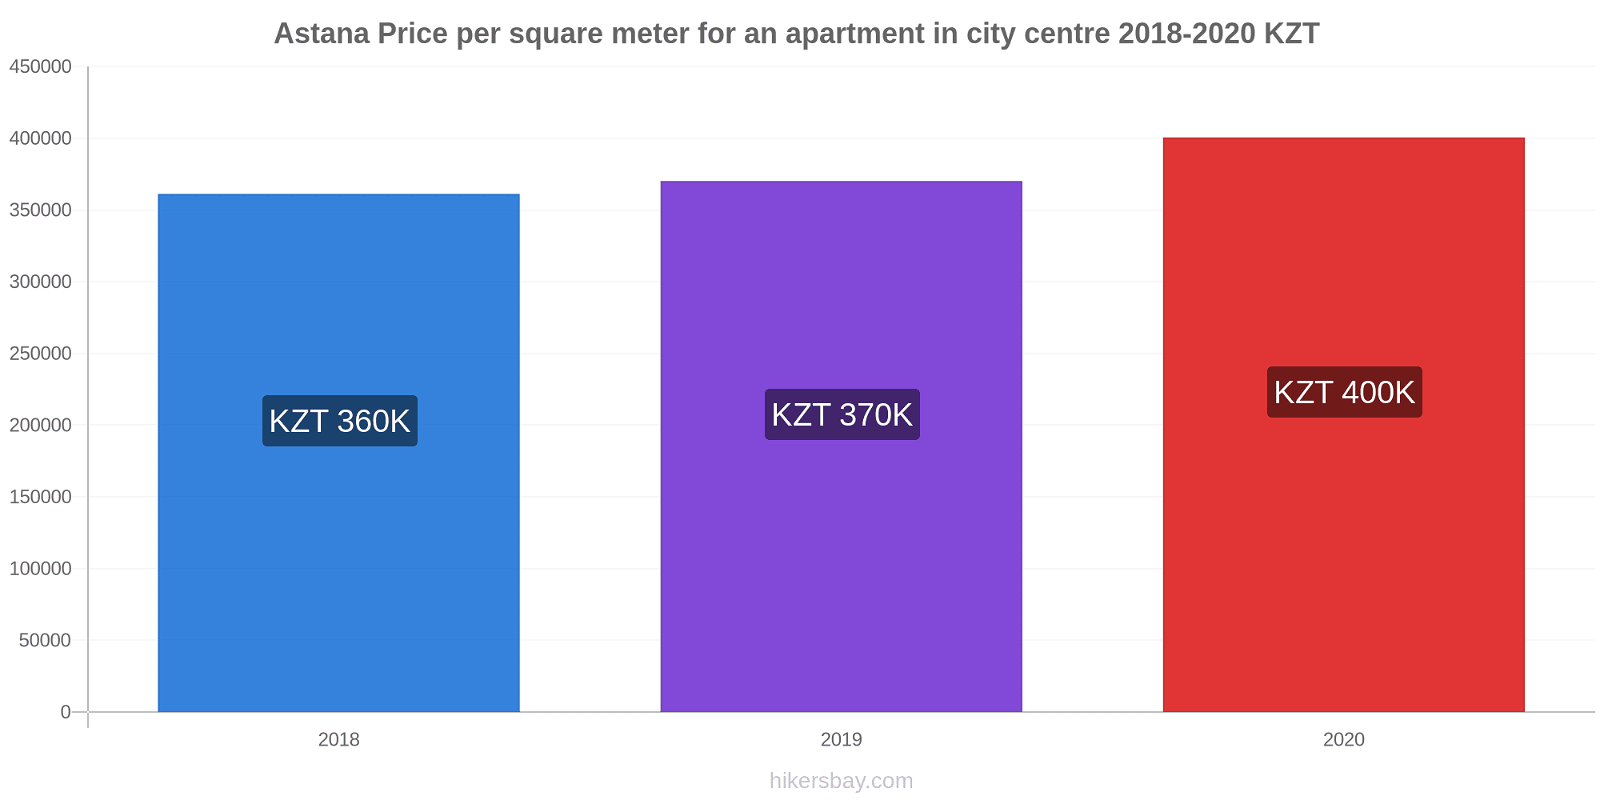 Astana price changes Price per square meter for an apartment in city centre hikersbay.com